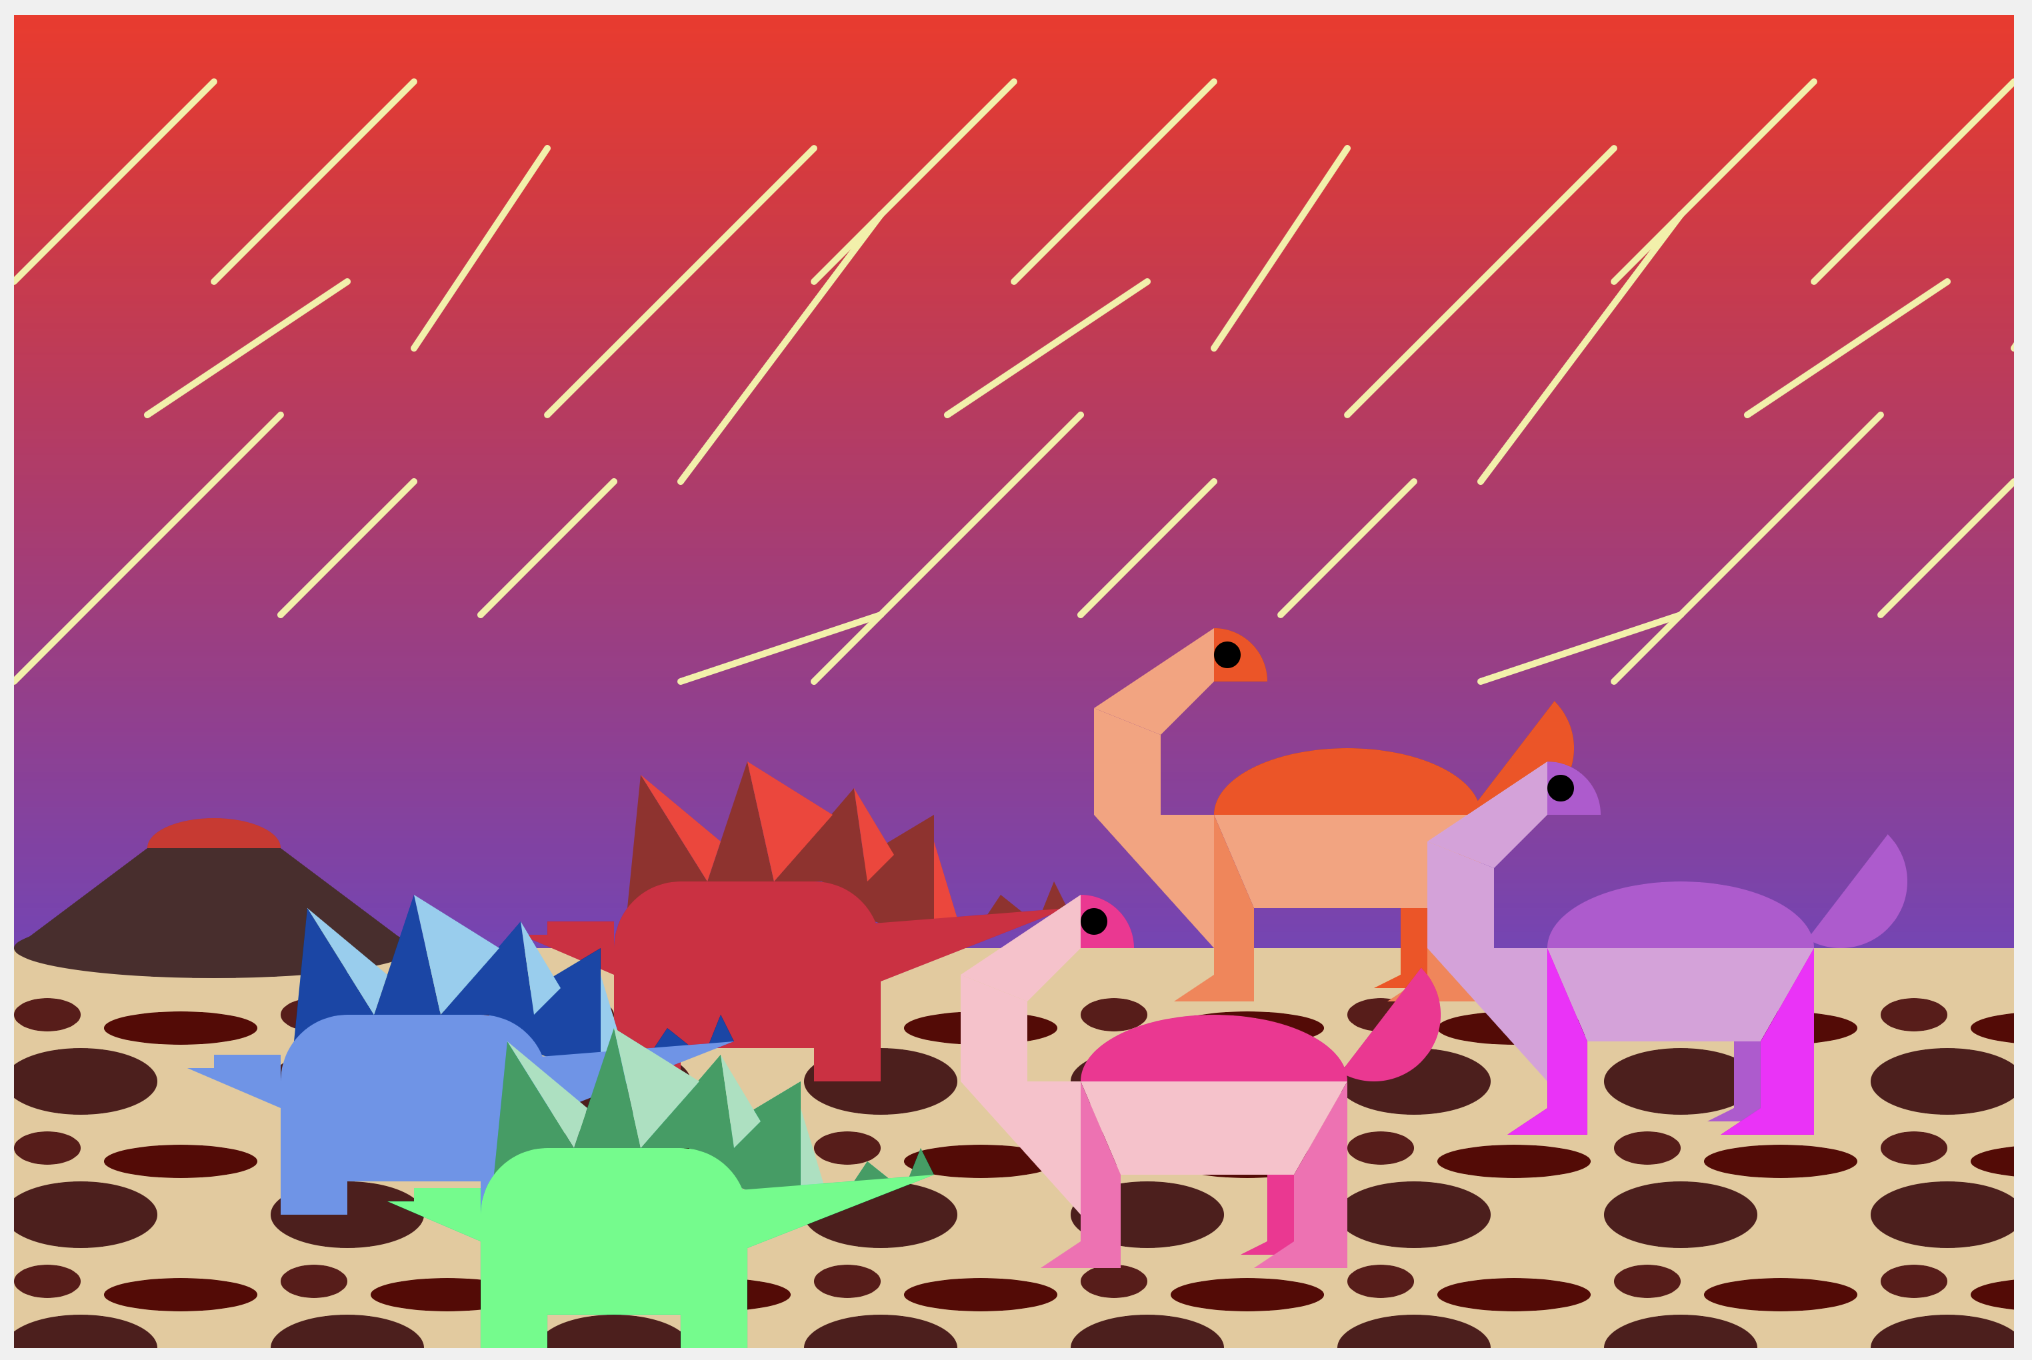 Multicolored stegosauruses and brachiosauruses stand next to a mountain and watch small meteorites rain down.